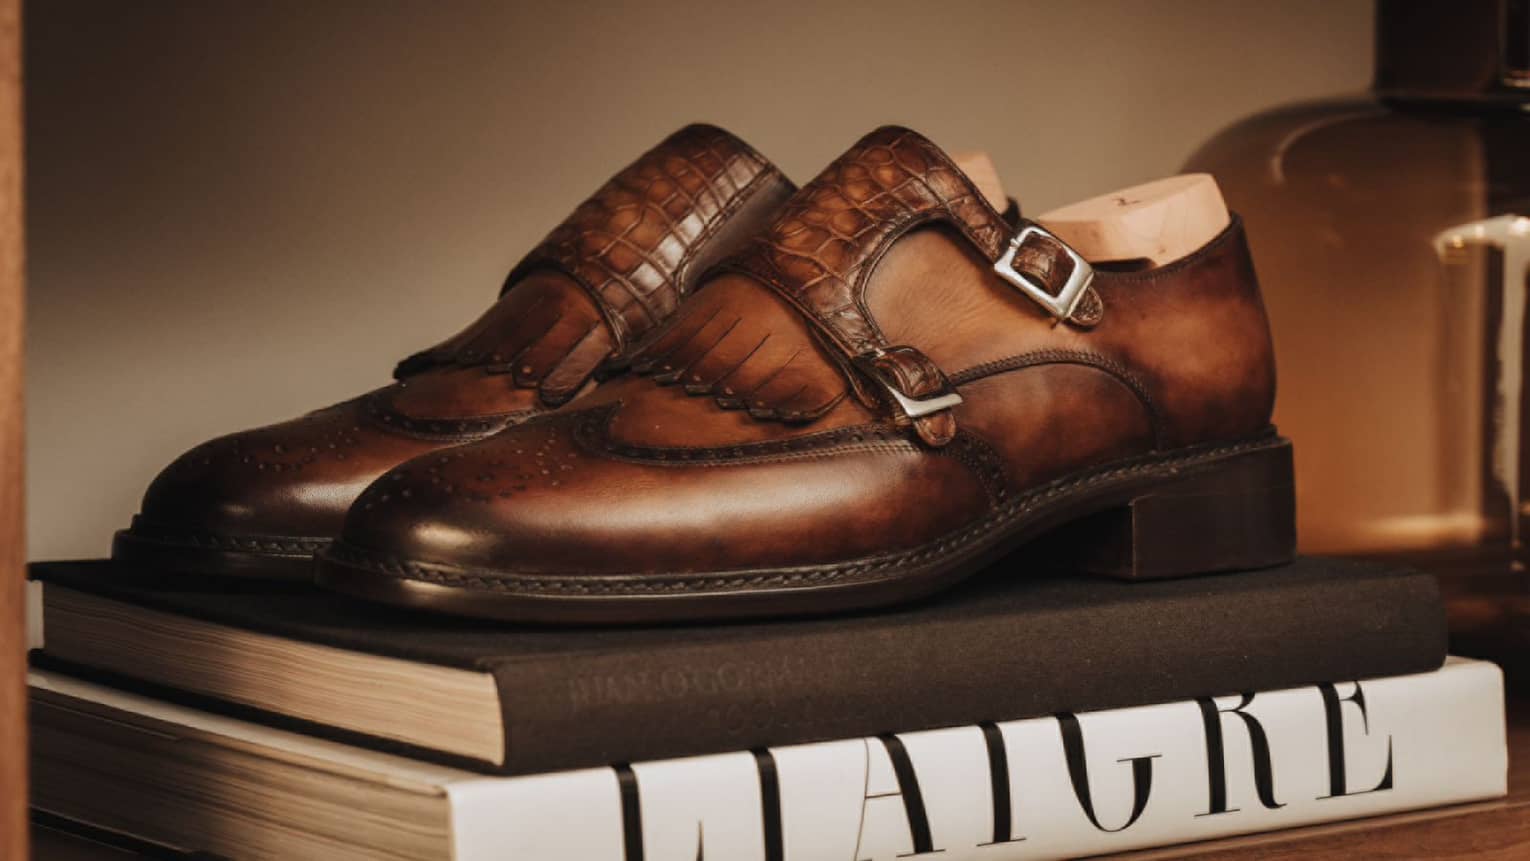 Brown leather shoes with silver buckles placed on top of two books.